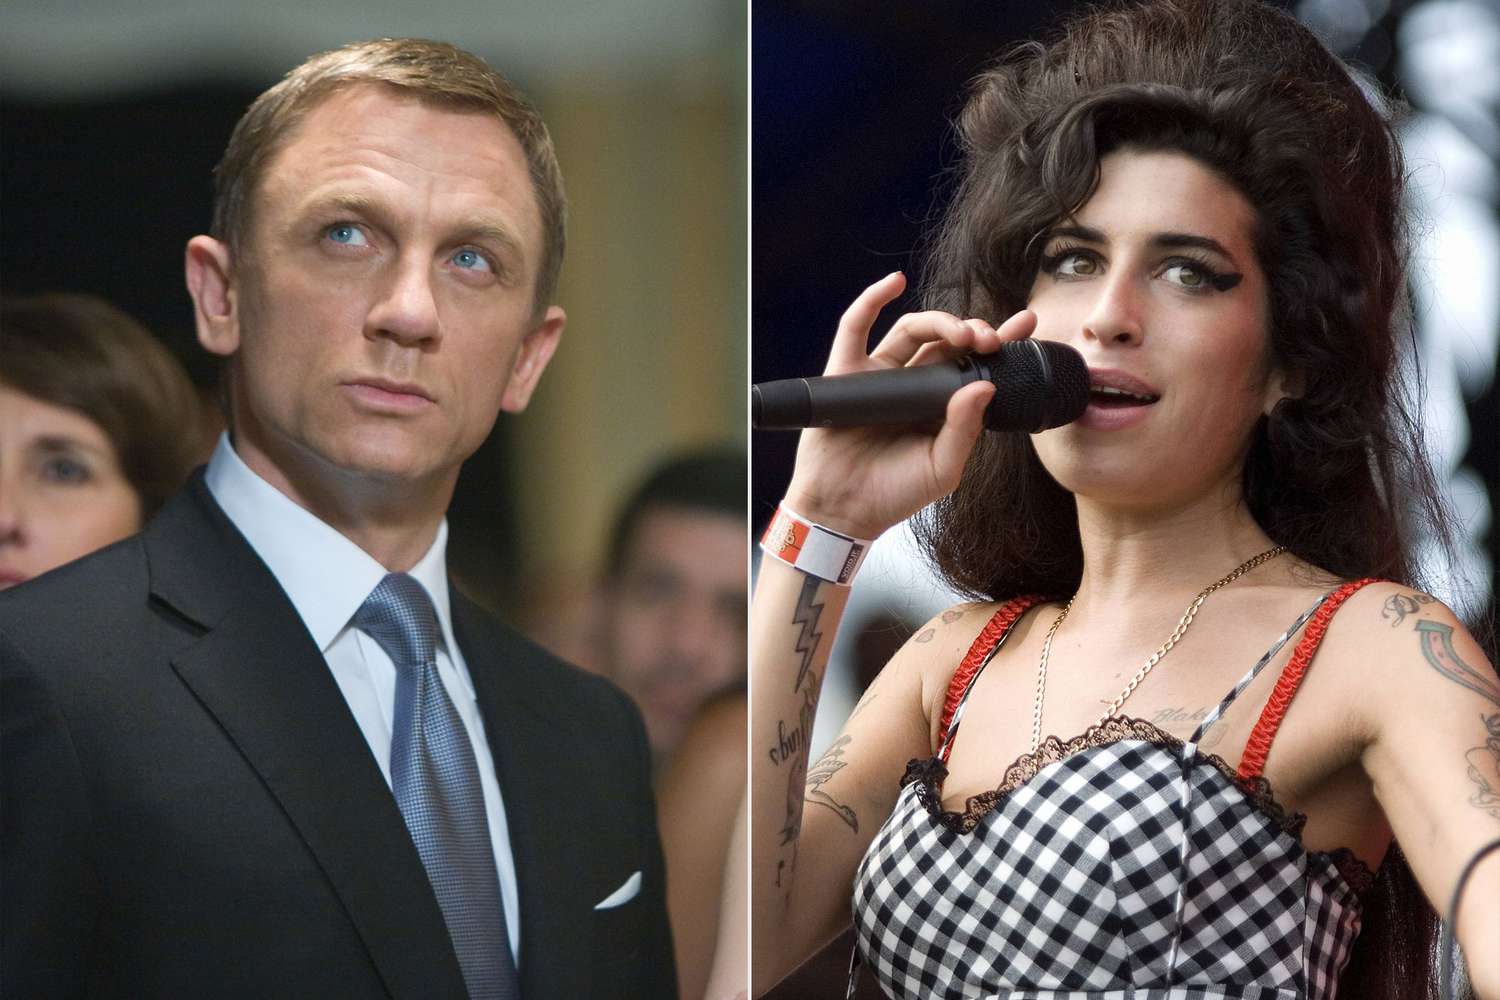 Daniel Craig in 'Quantum of Solace' and Amy Winehouse